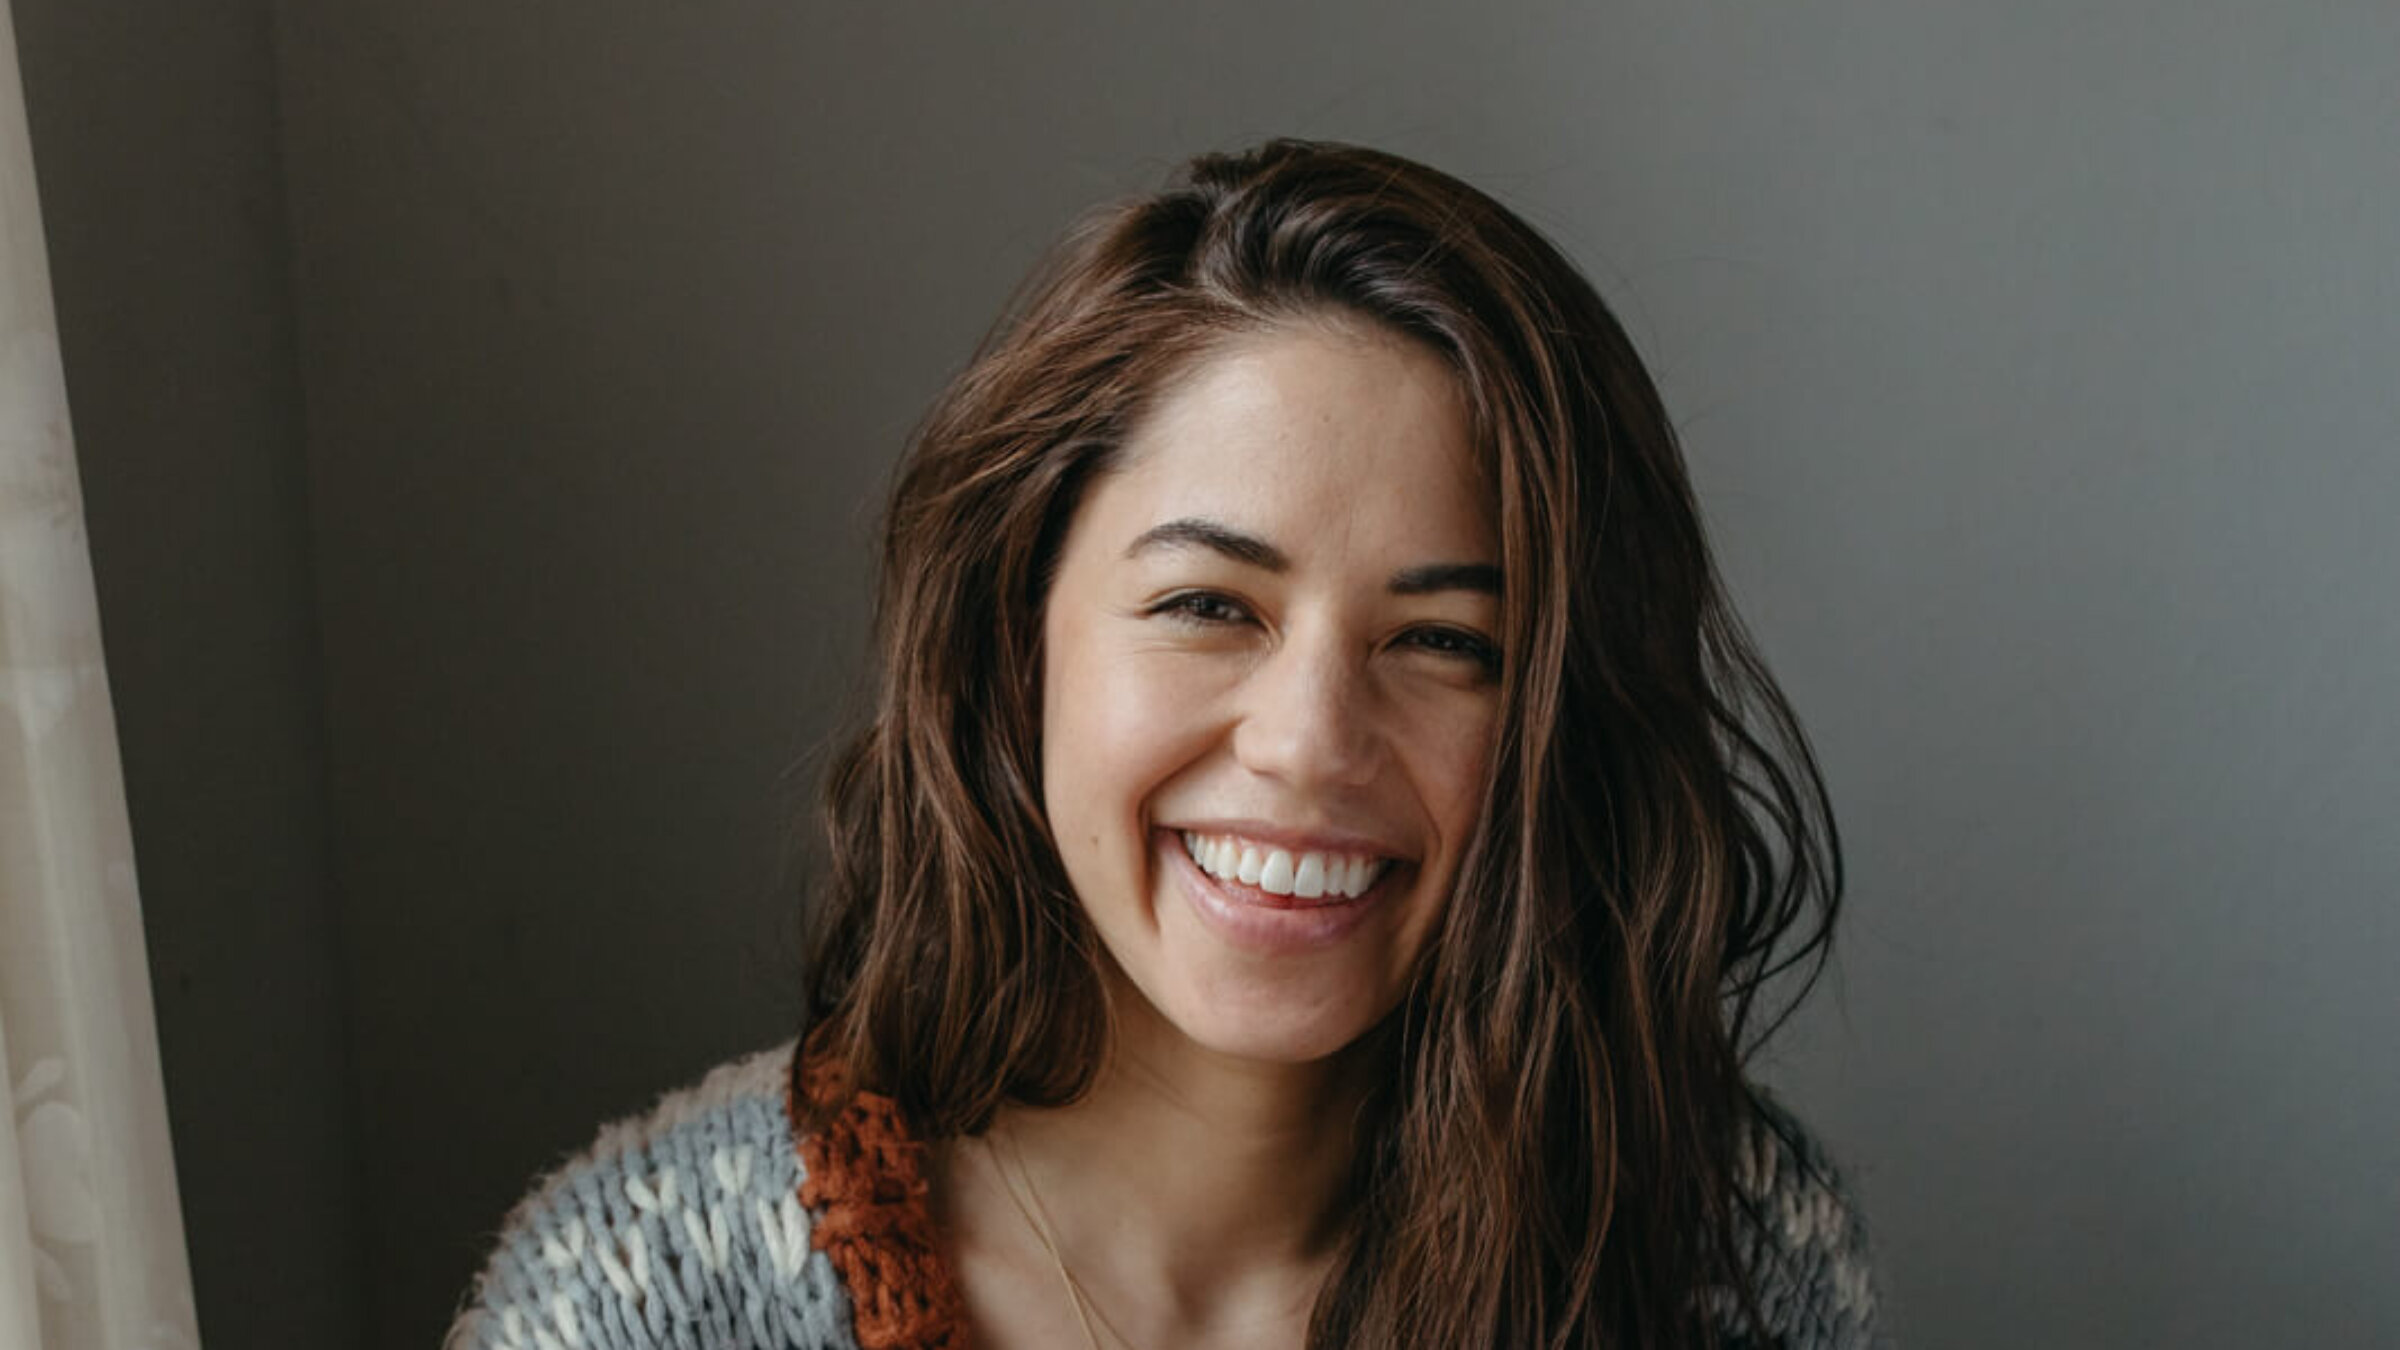 Molly Yeh is a Julliard-trained percussionist and a Food Network Star. Her latest book is "Home Is Where the Eggs Are."